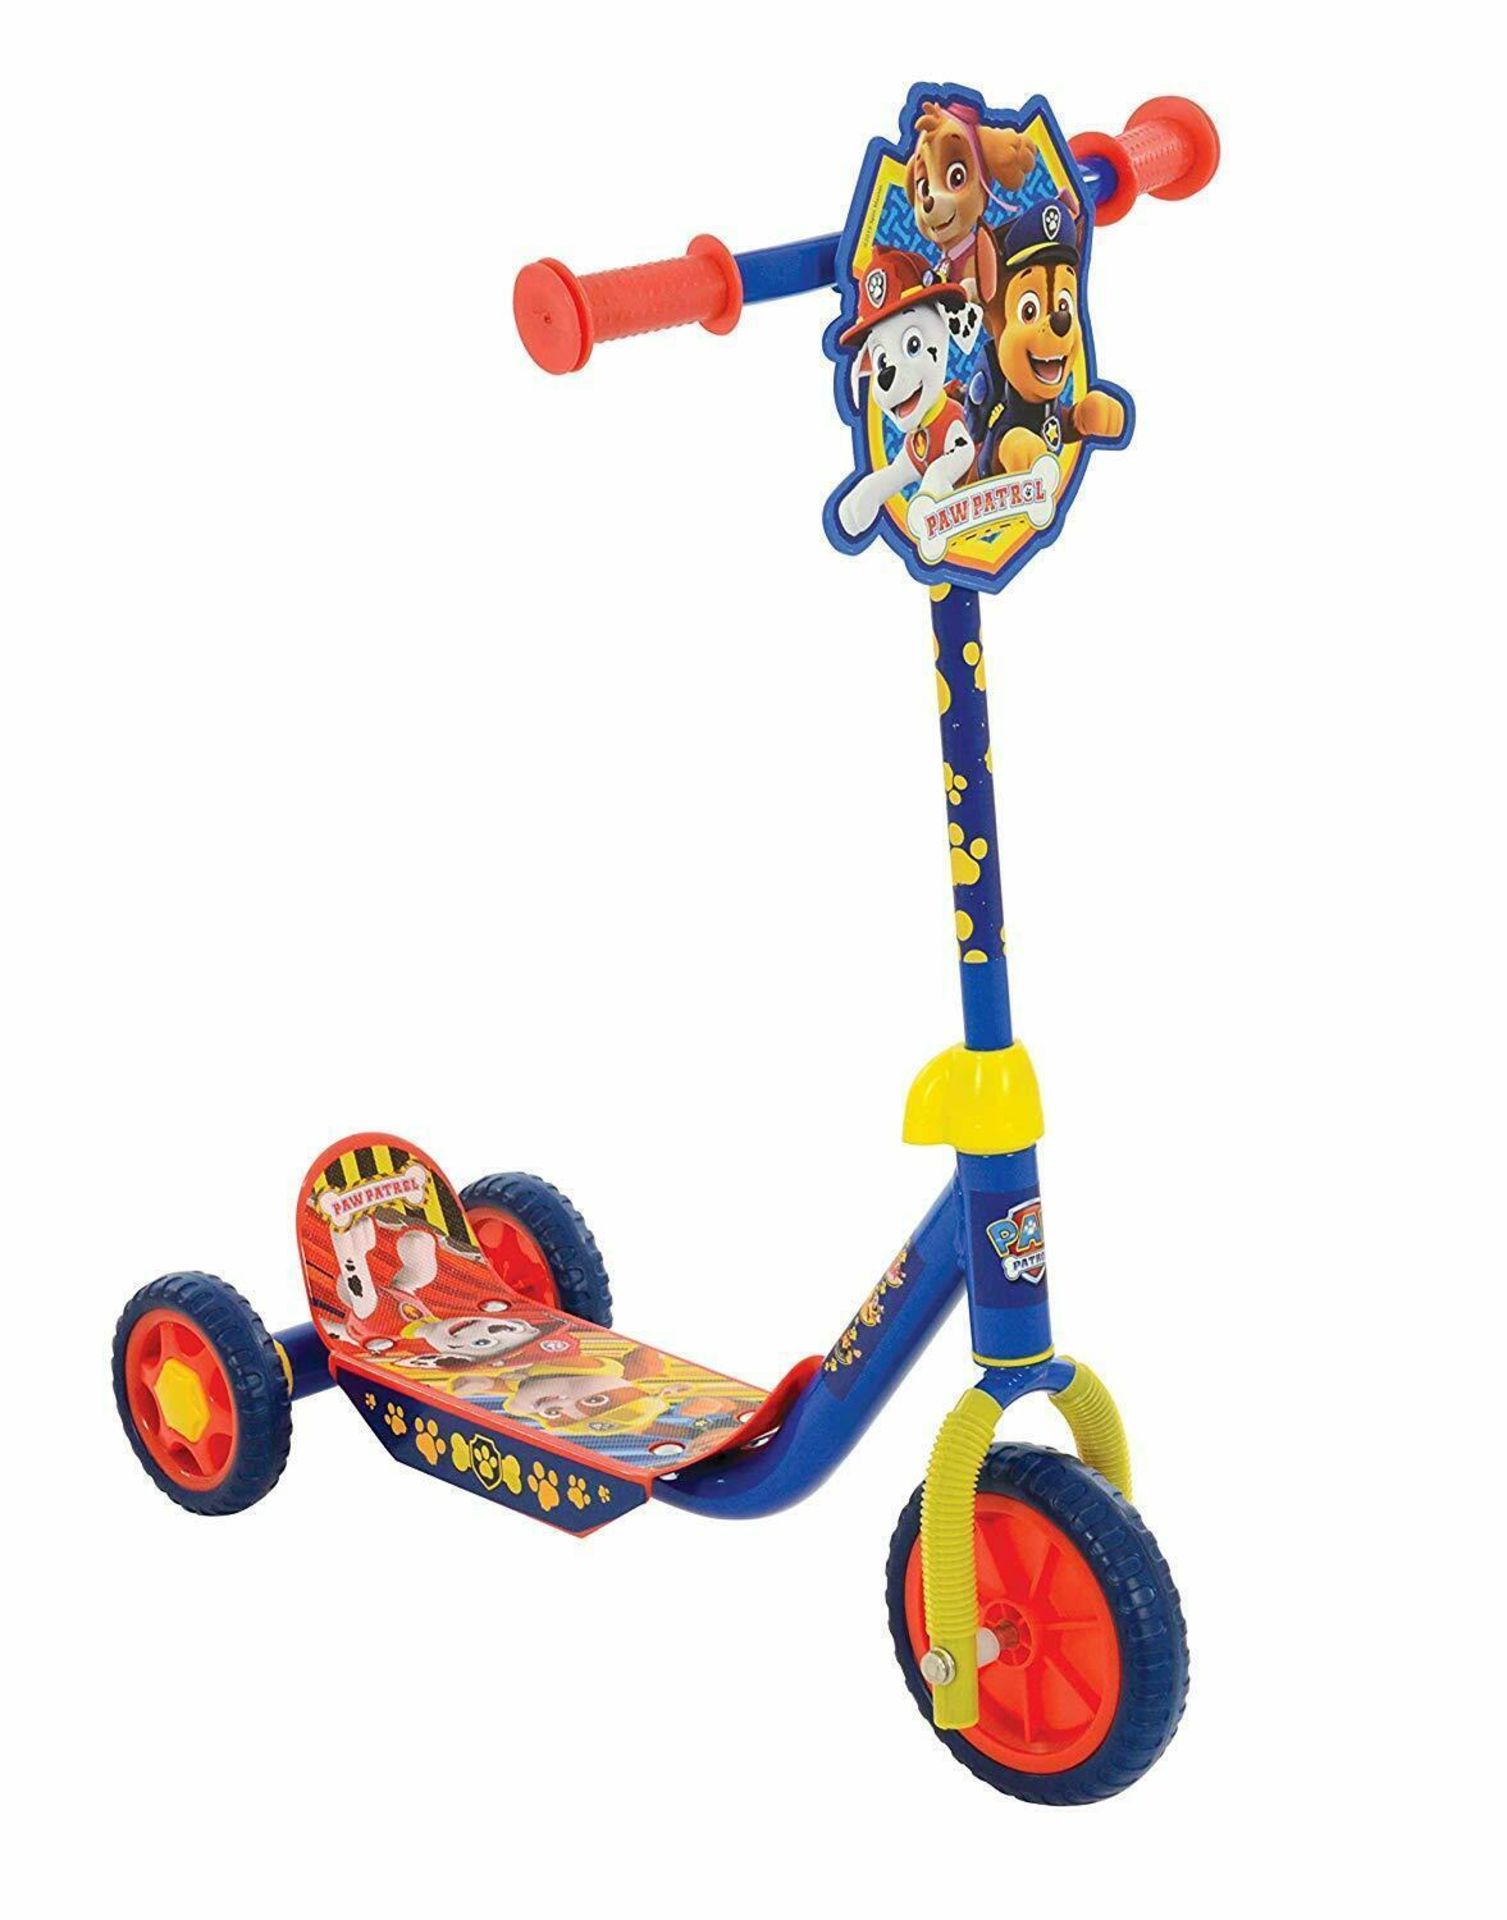 Paw Patrol Deluxe Tri-Scooter £24.79 RRP